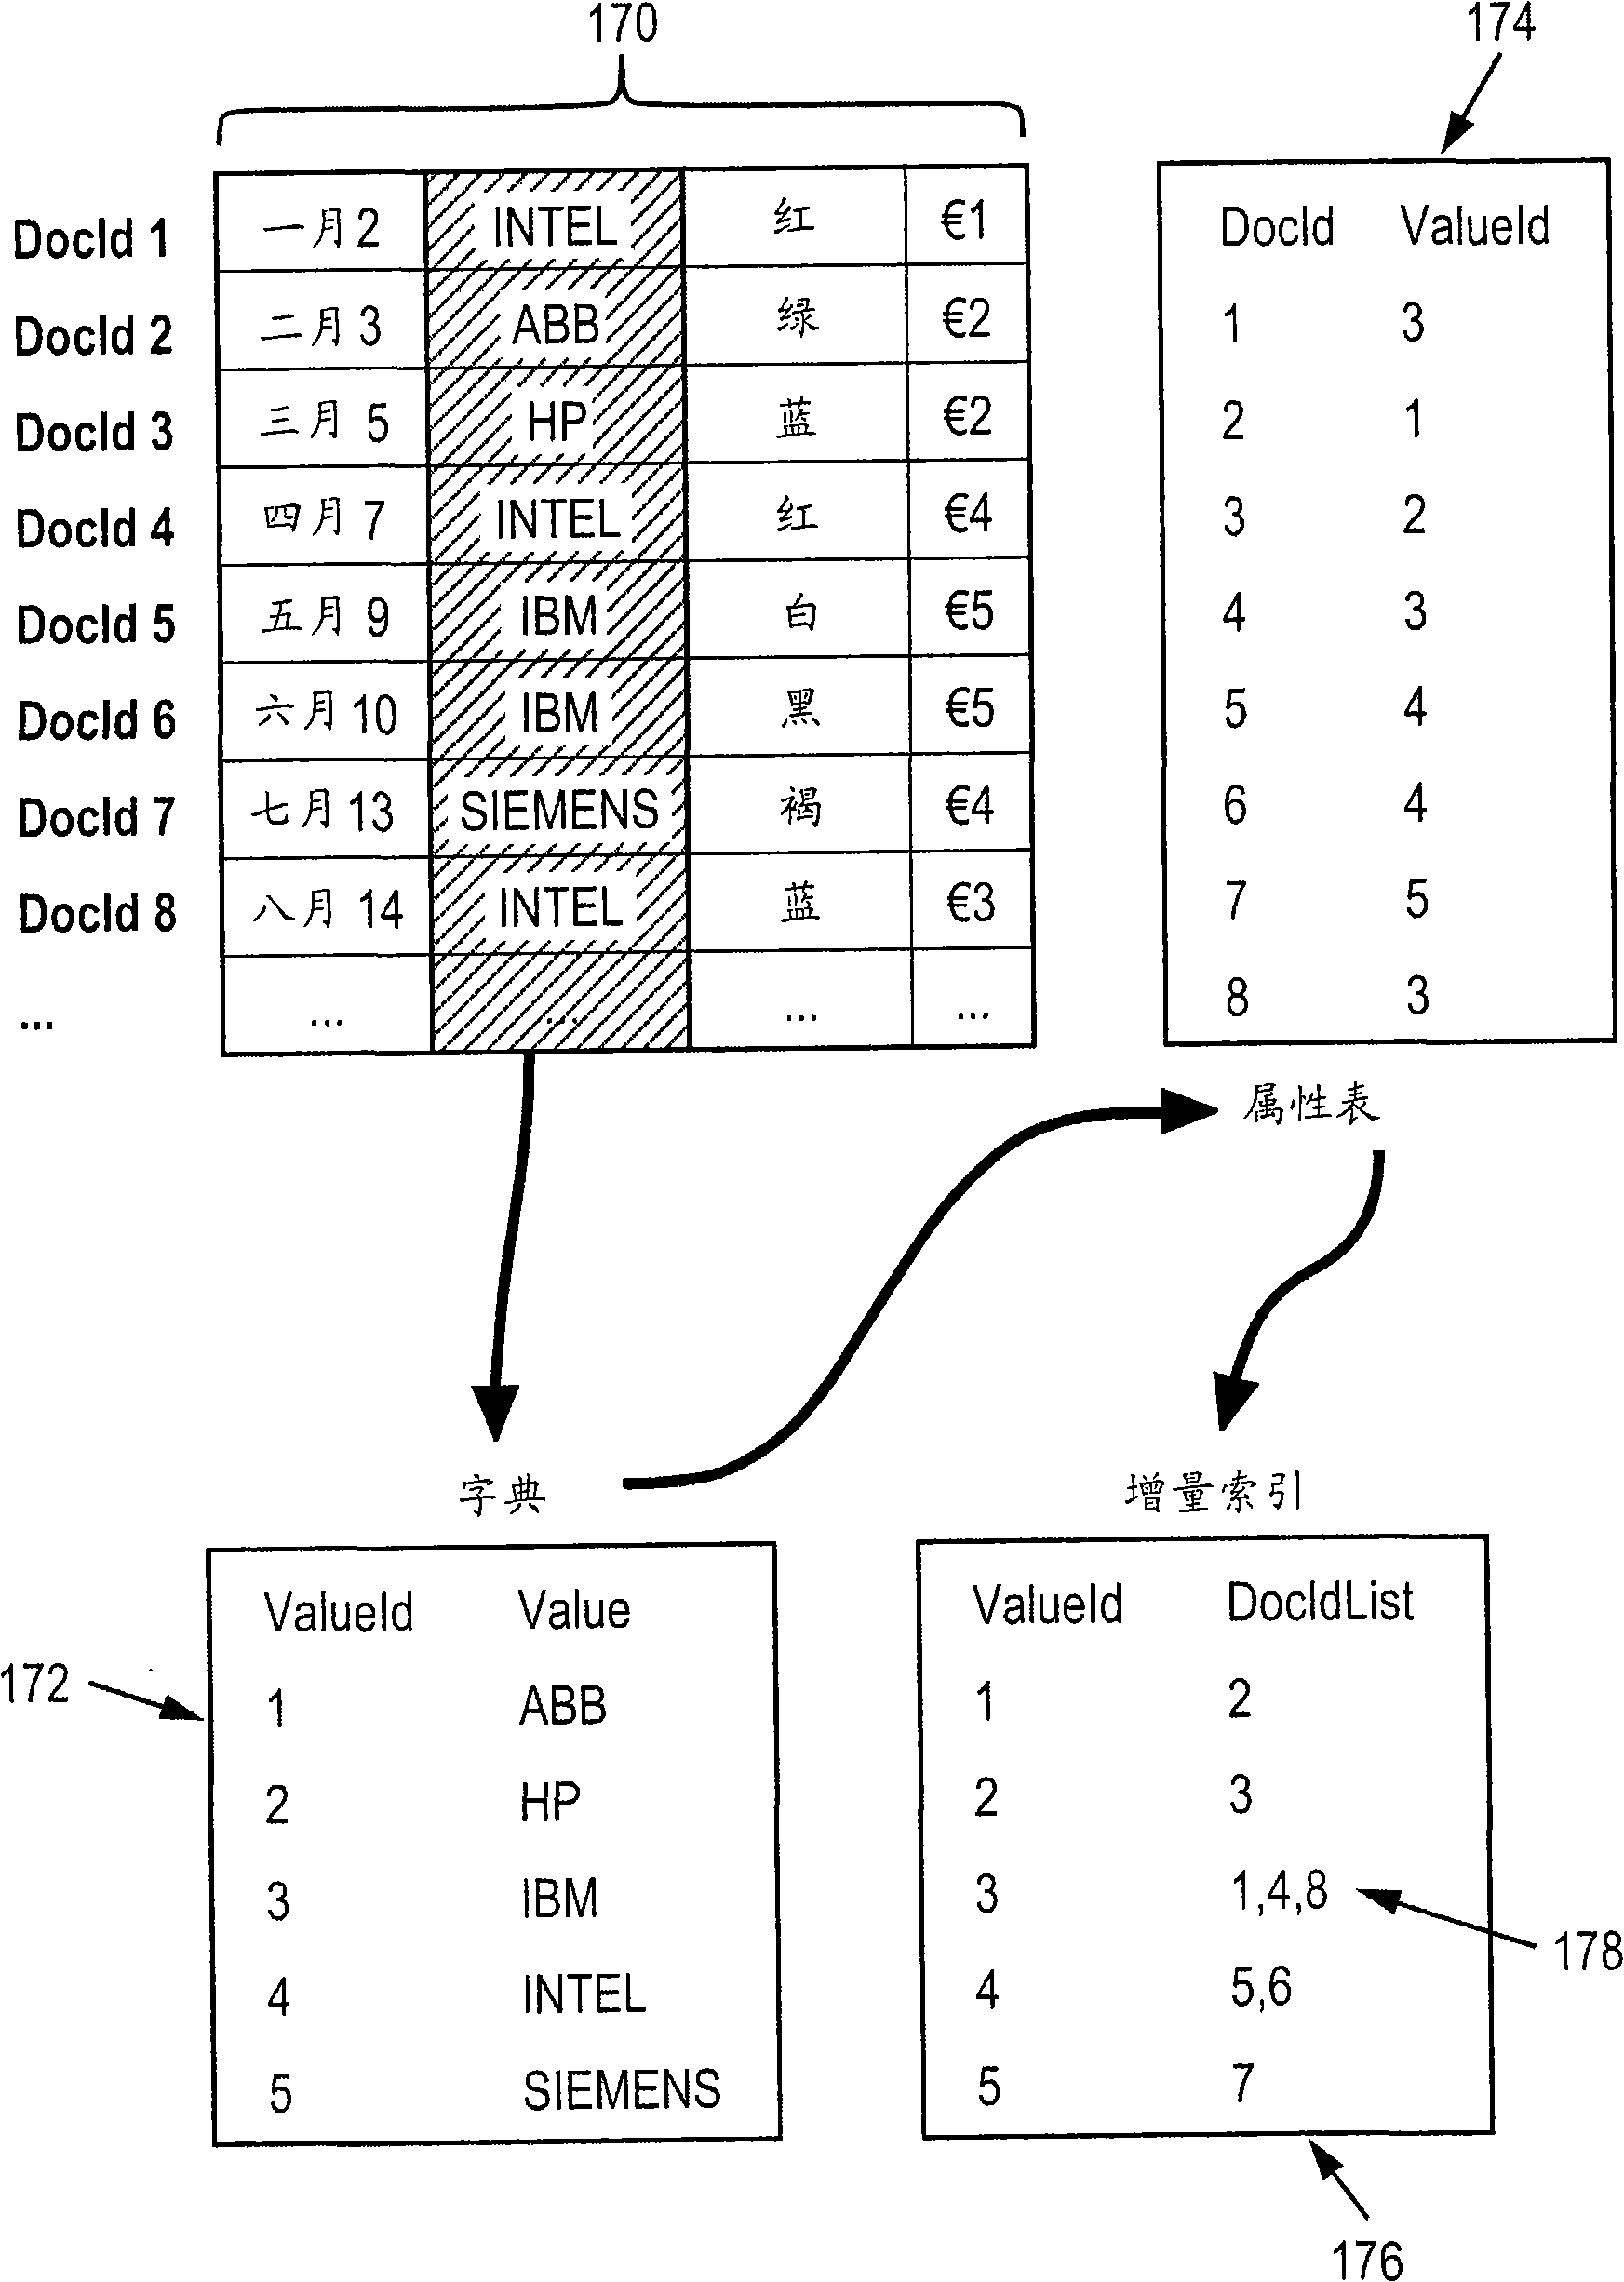 Block compression of tables with repeated values